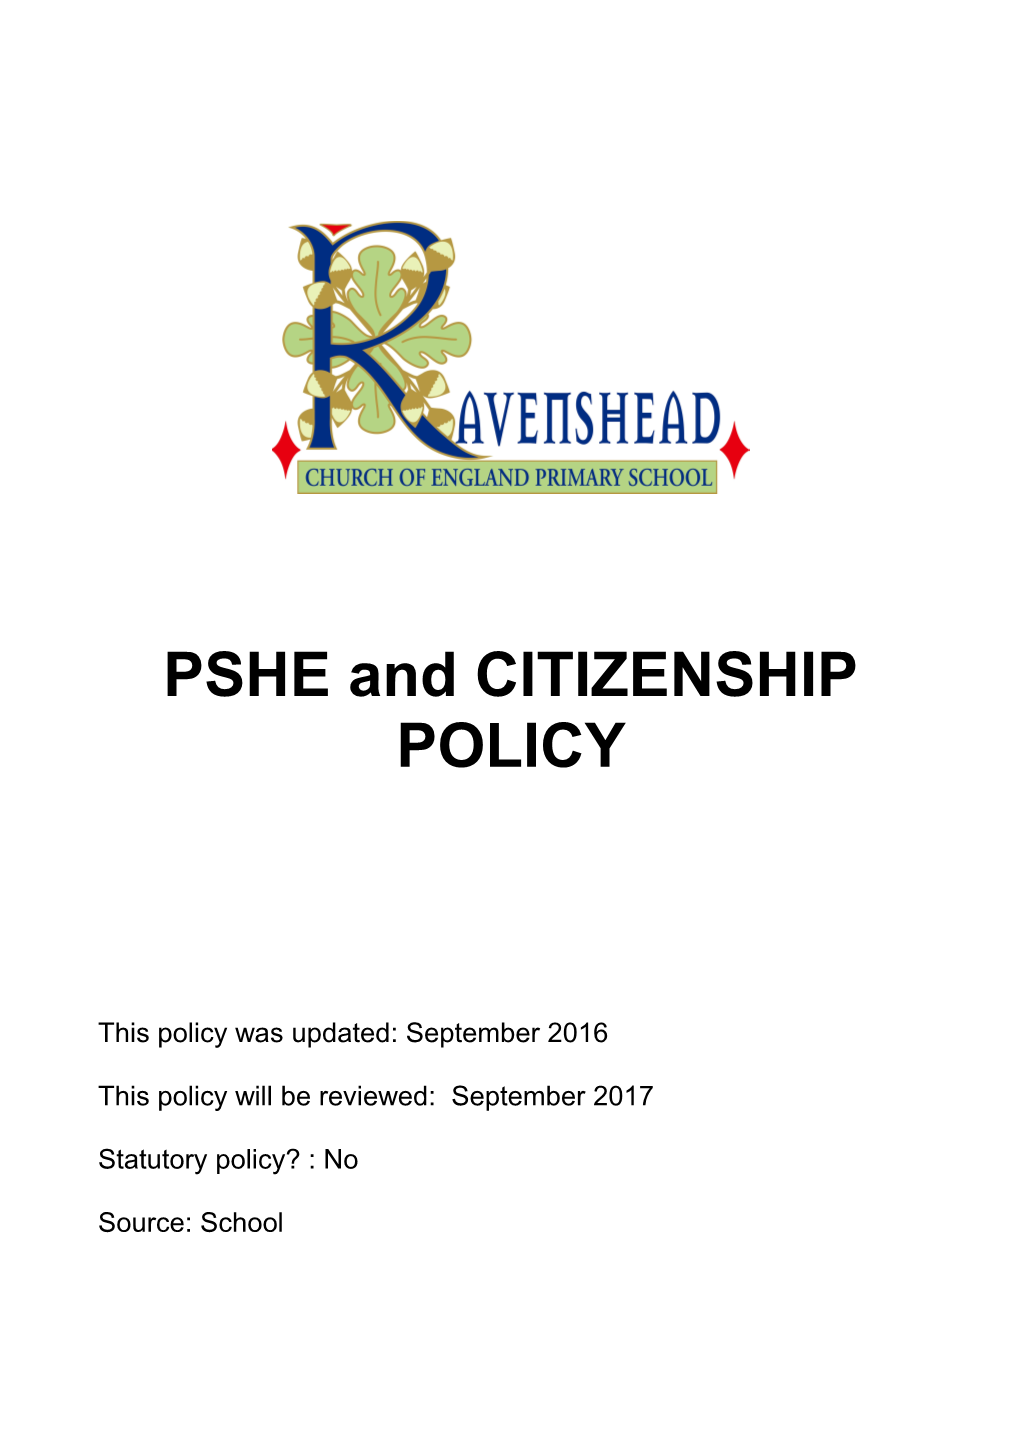 Ravenshead C of E Primary School PSHE and Citizenship Policy